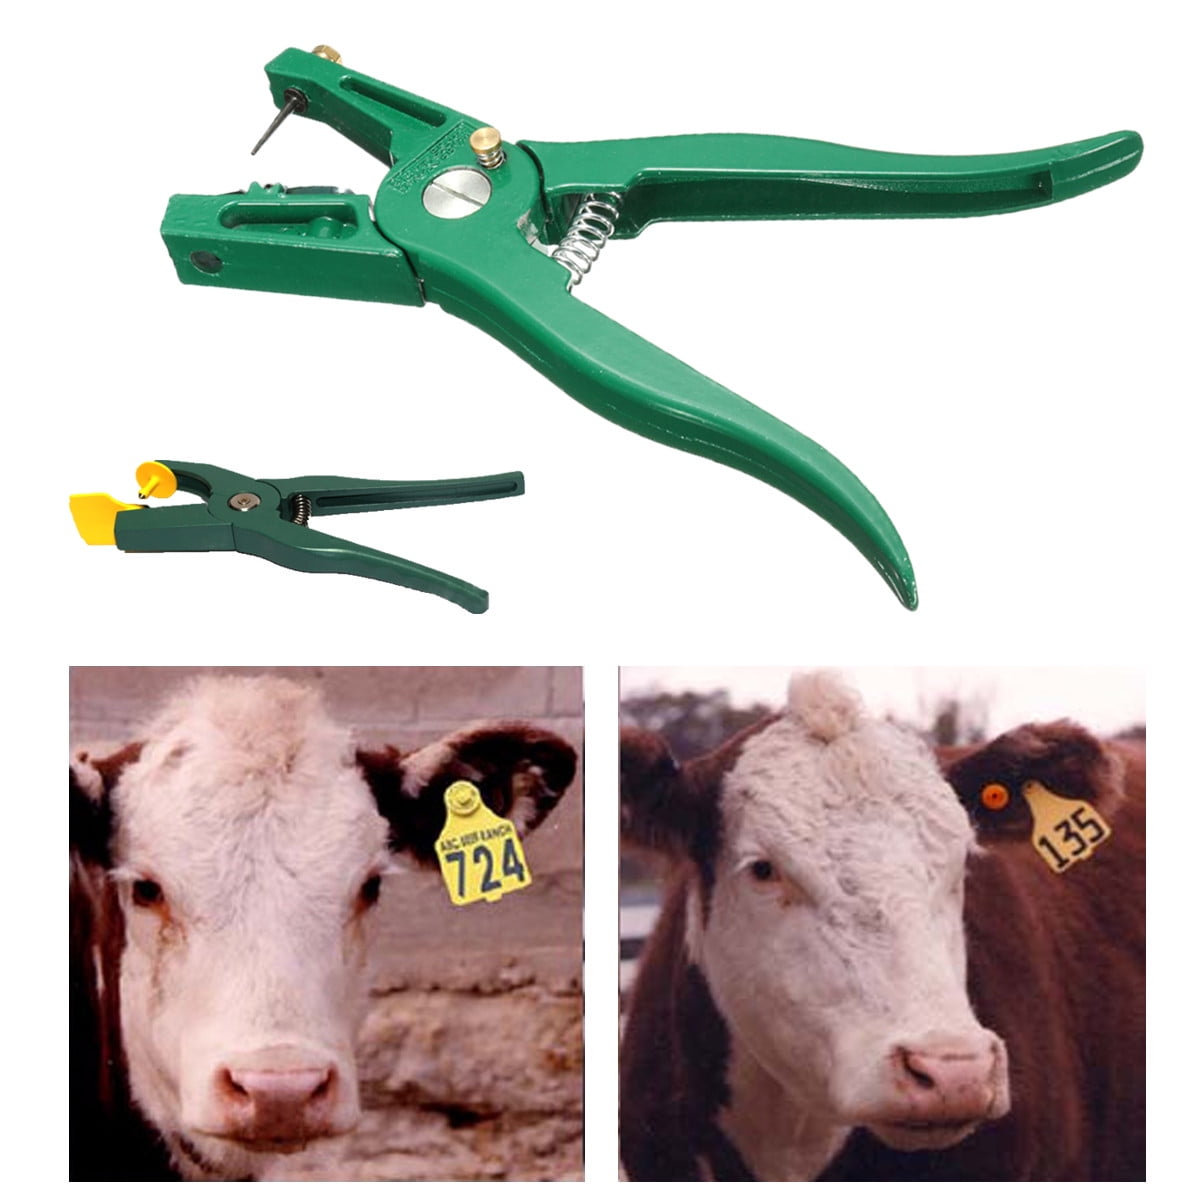 Ear Tag Plier Applicator Puncher Tagger for Livestock Sheep Hog Cattle Beef Cow 